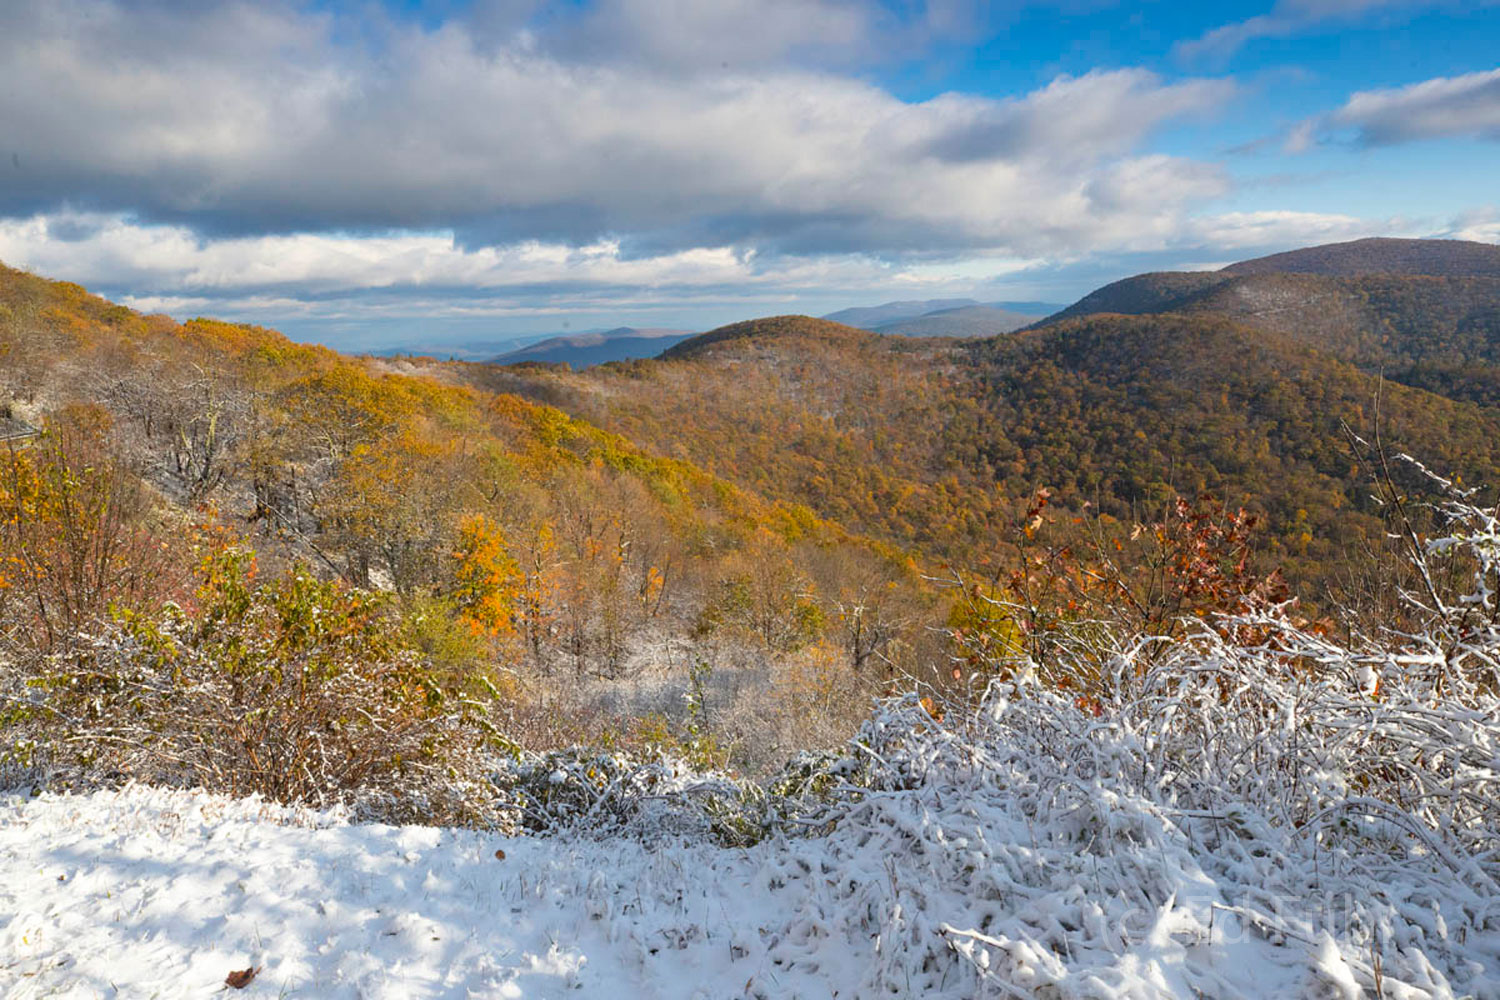 An early snow greets fall's colors along Skyline Drive.